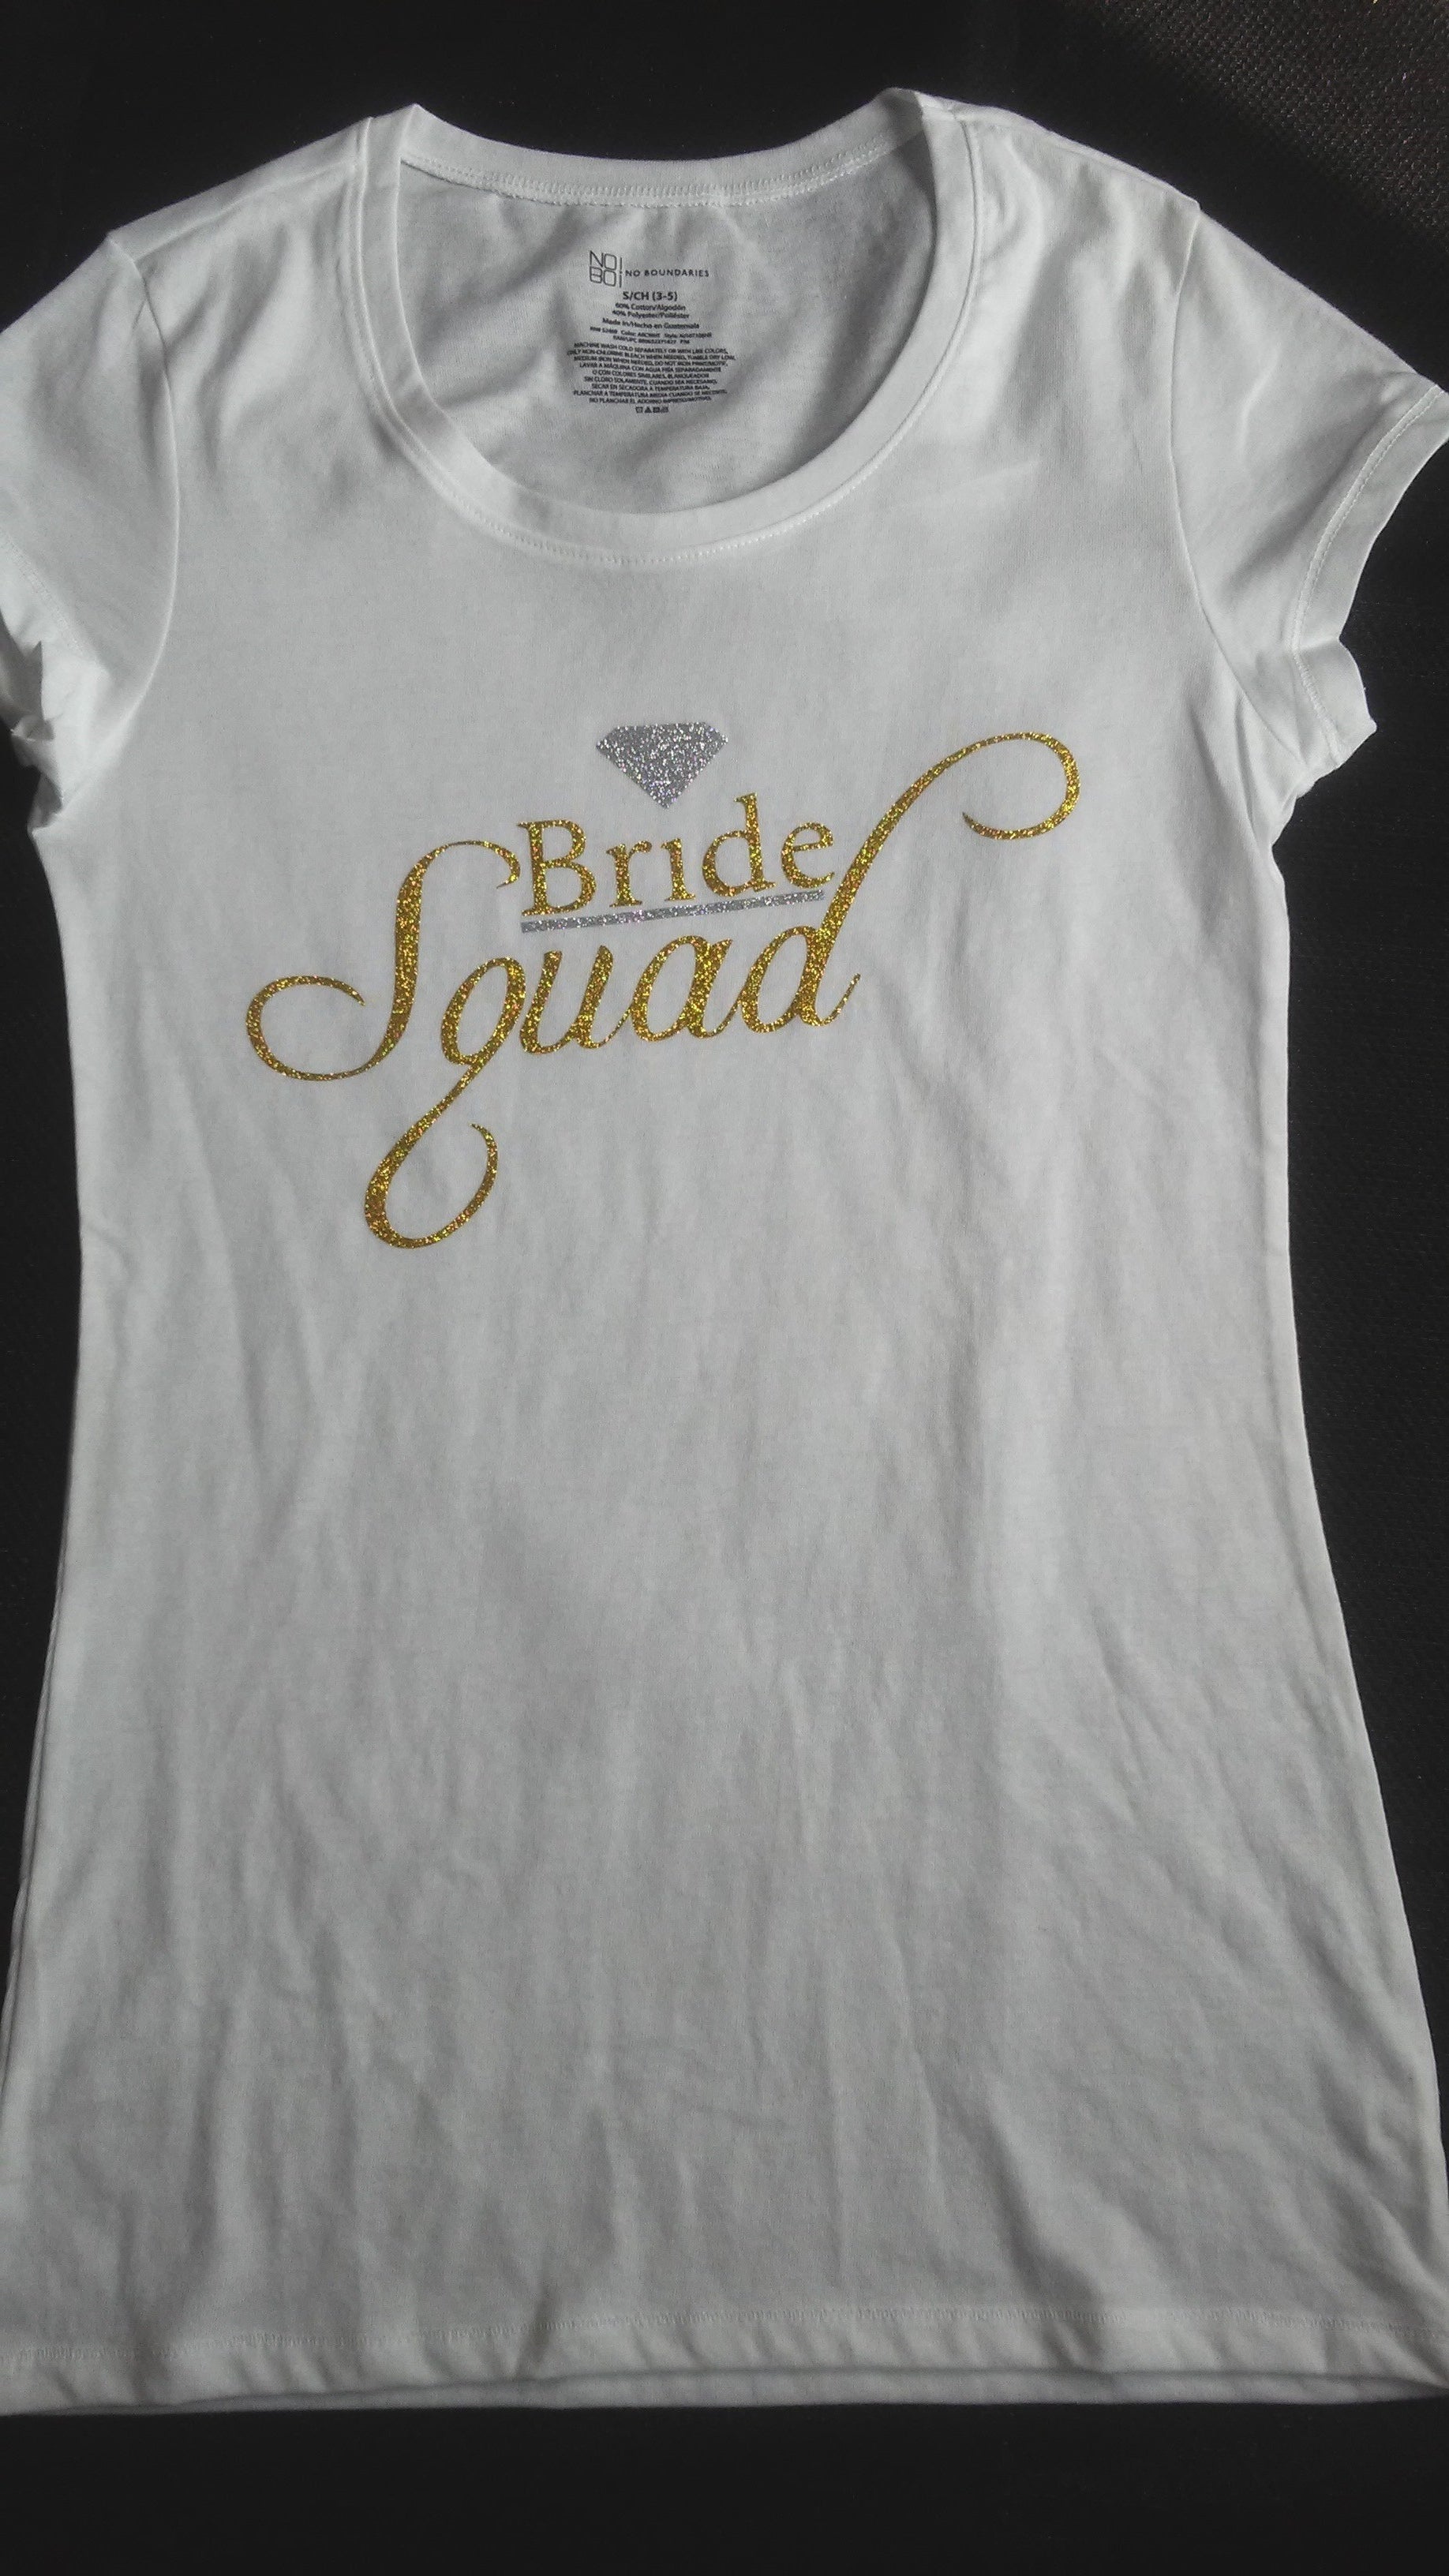 Silver & Gold Bling Bride Squad T-Shirt